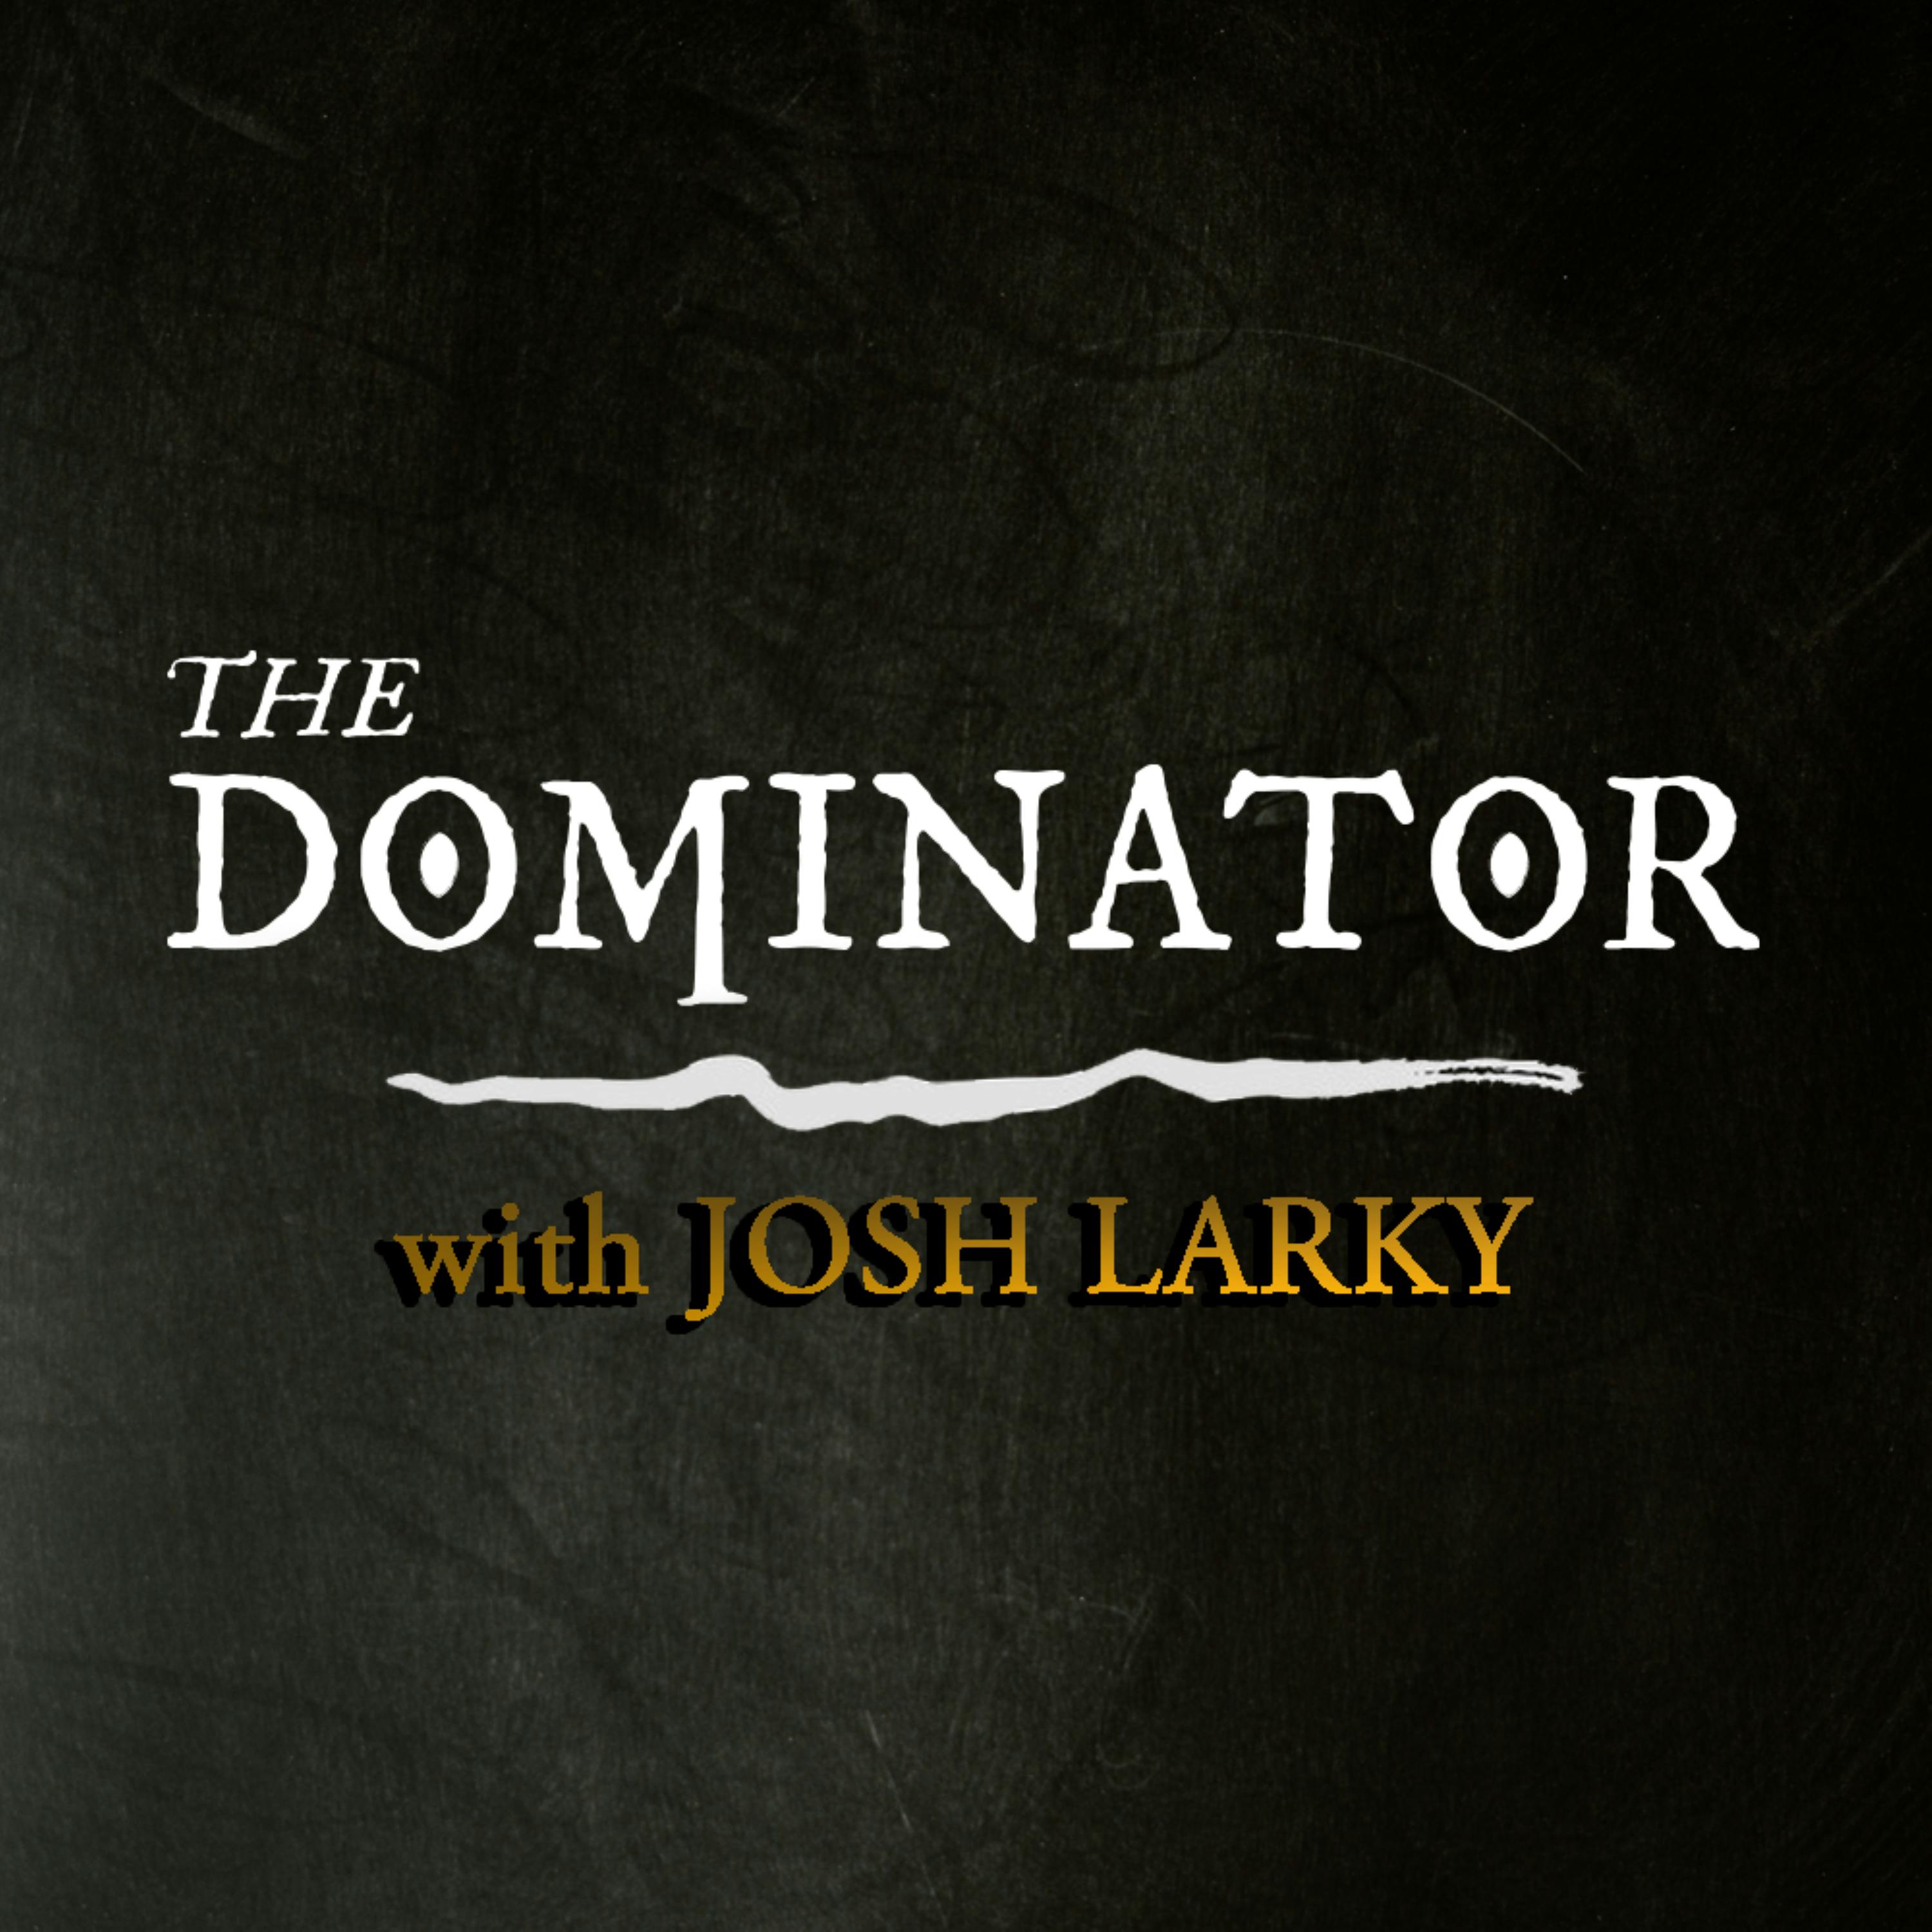 The Dominator - Rookies to Target and Fade in Best Ball